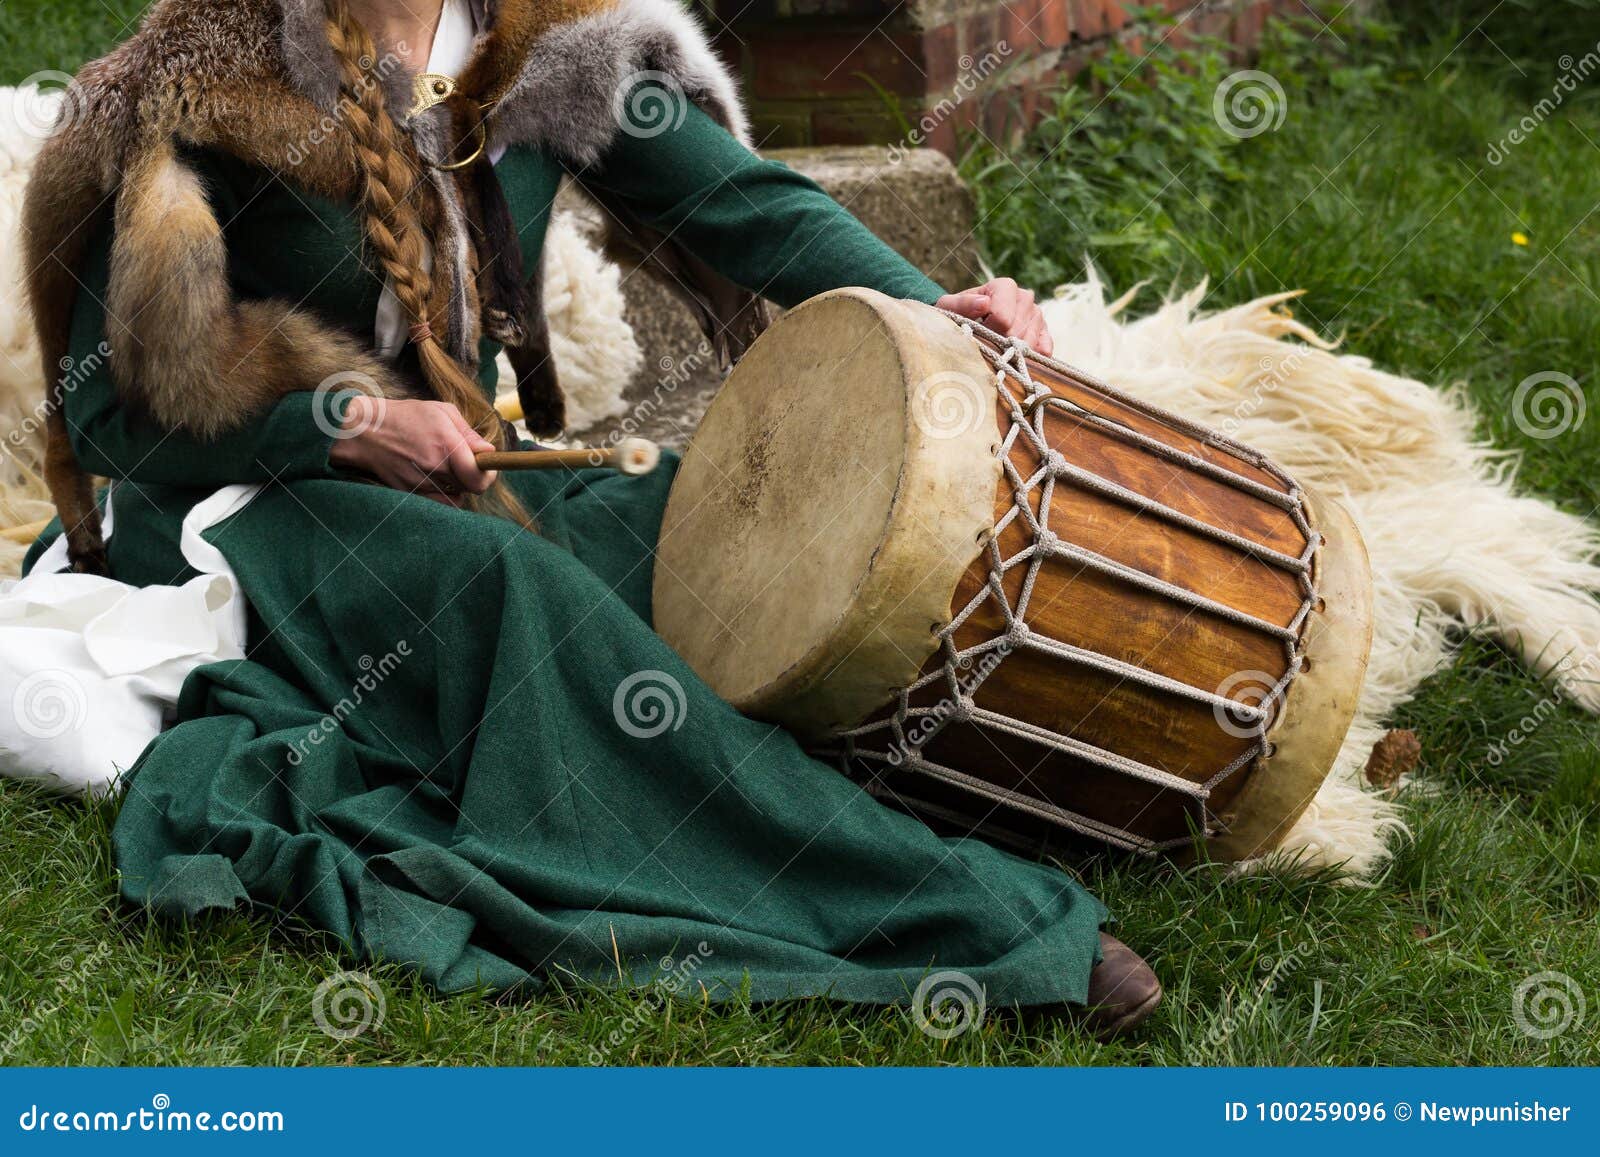 Medieval Musical Instrument Stock Photo - Image of knight, background